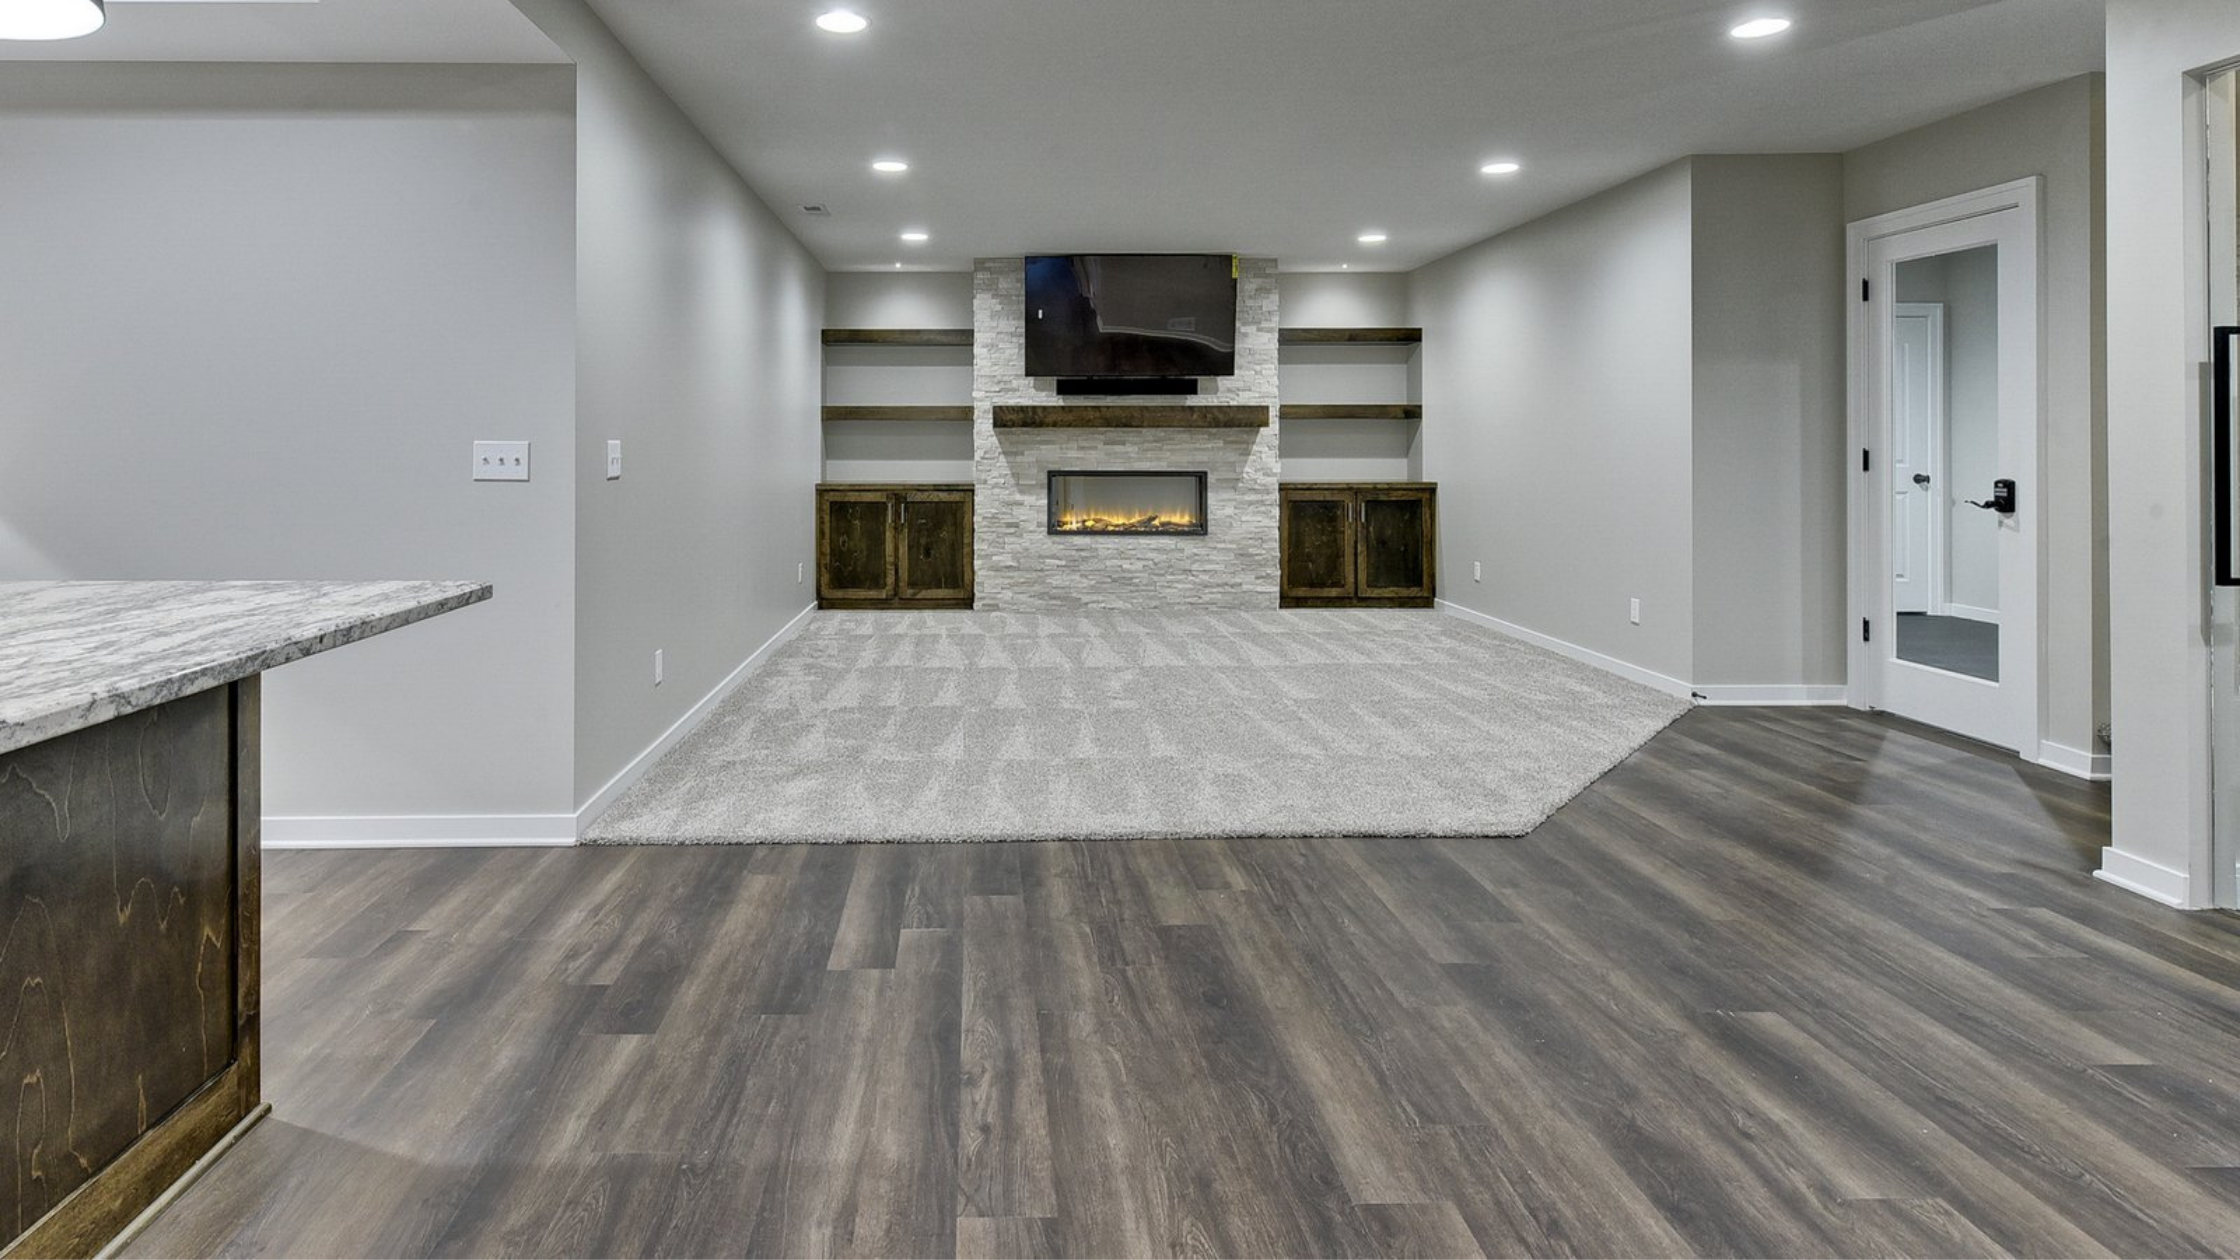 Tips for Hiring a Whole House Basement Finishing Contractor